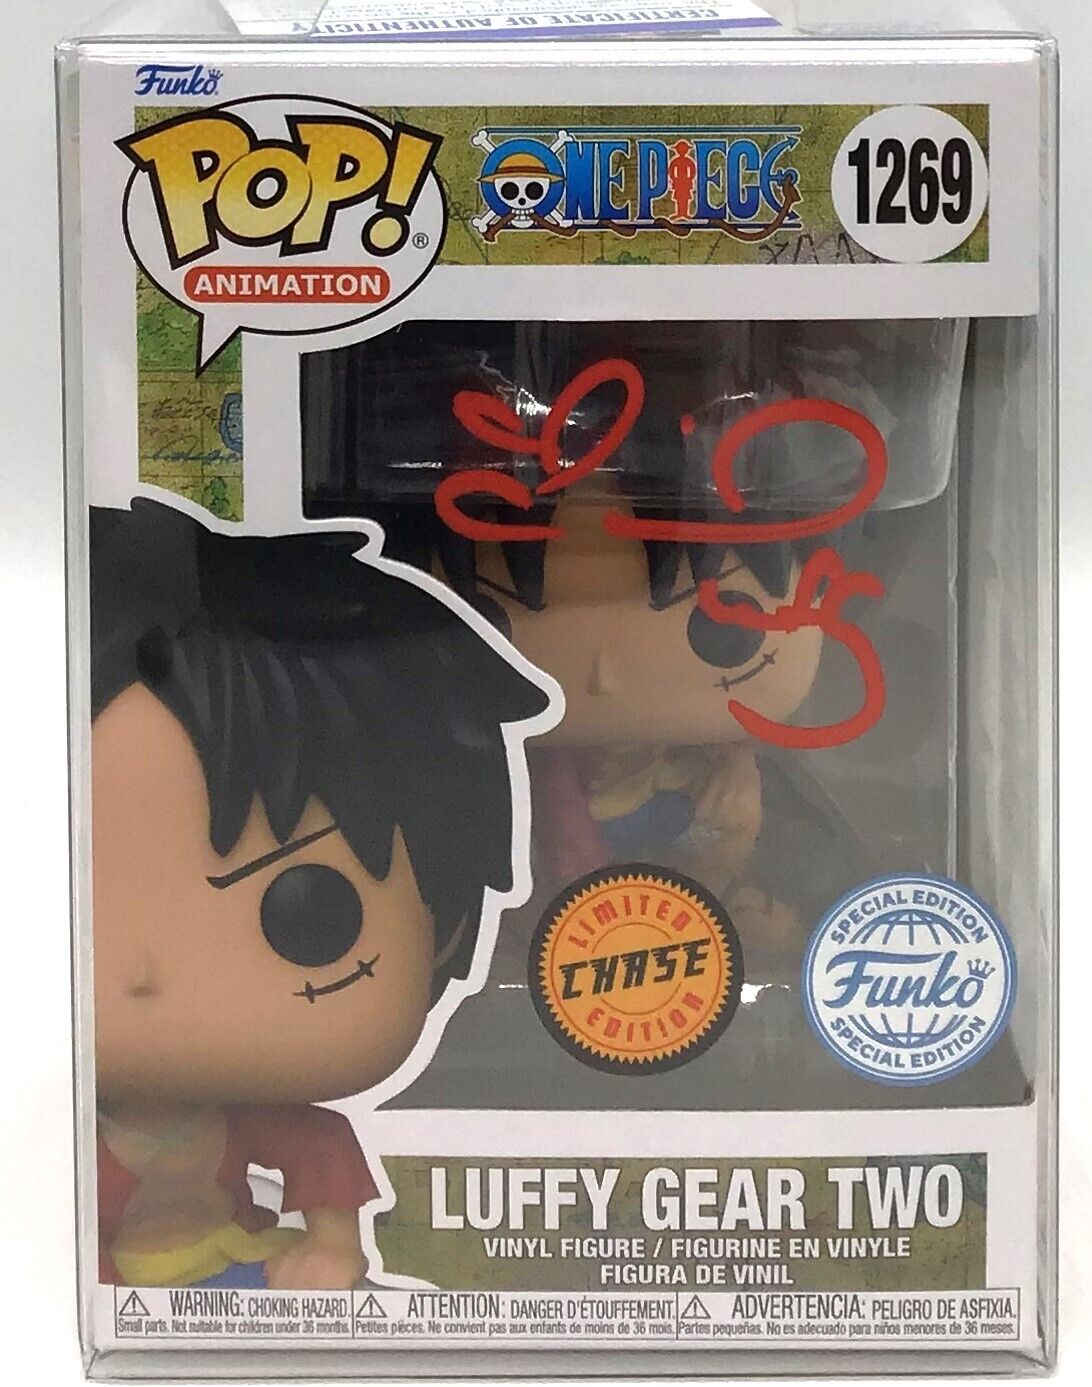 Funko Pop One Piece Luffy Gear Two CHASE Signed by Colleen Clinkenbeard PSA